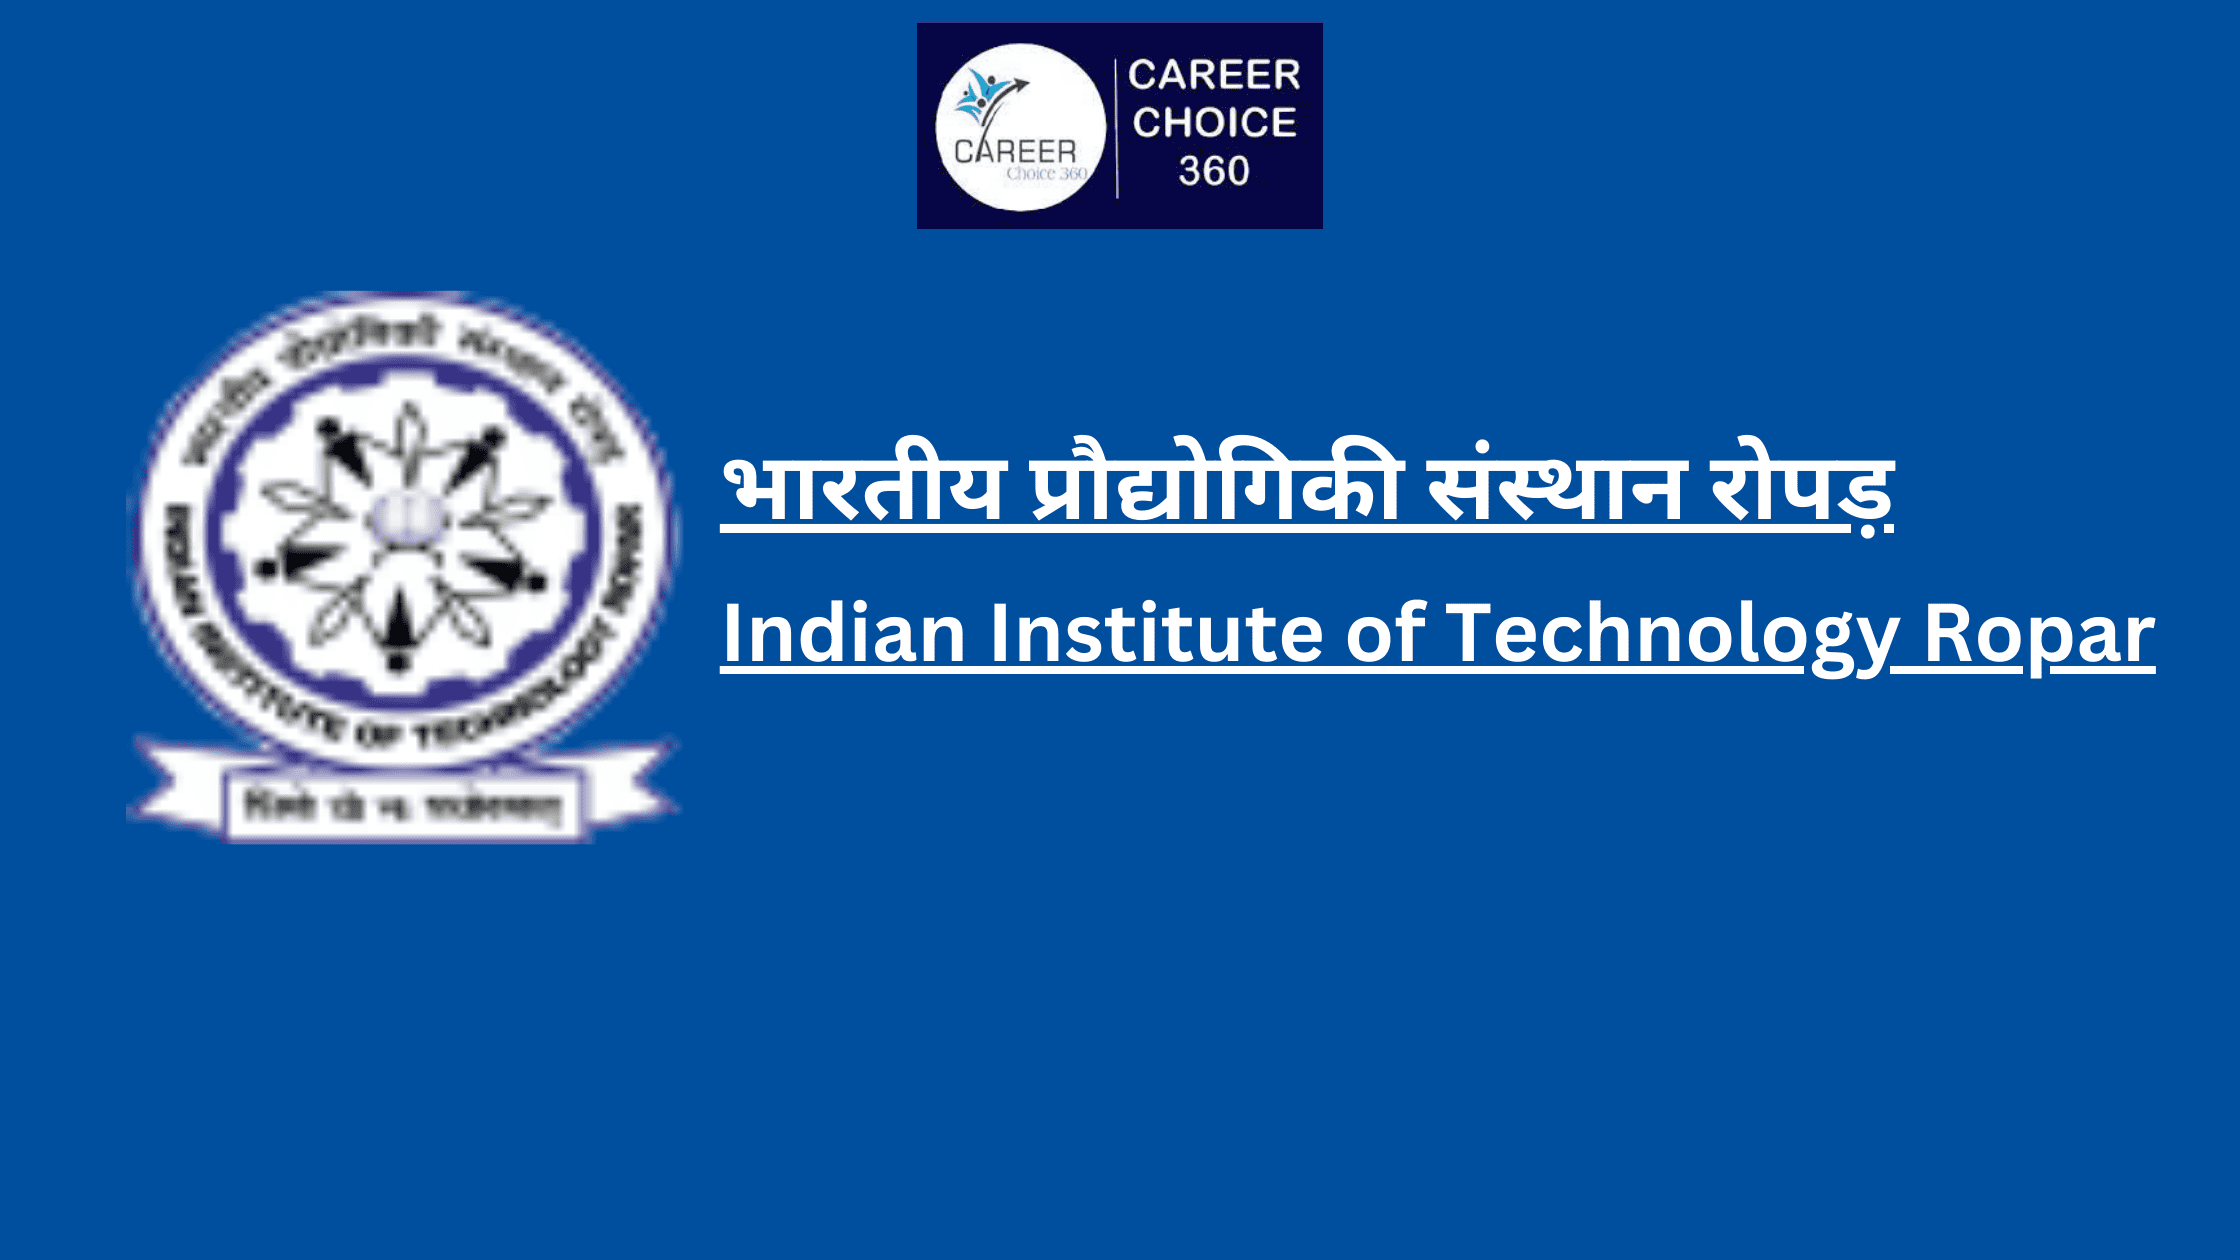 You are currently viewing Indian Institute of Technology Ropar (IIT Ropar) : Course & Fees, Admission procedure, Rankings, and Placements